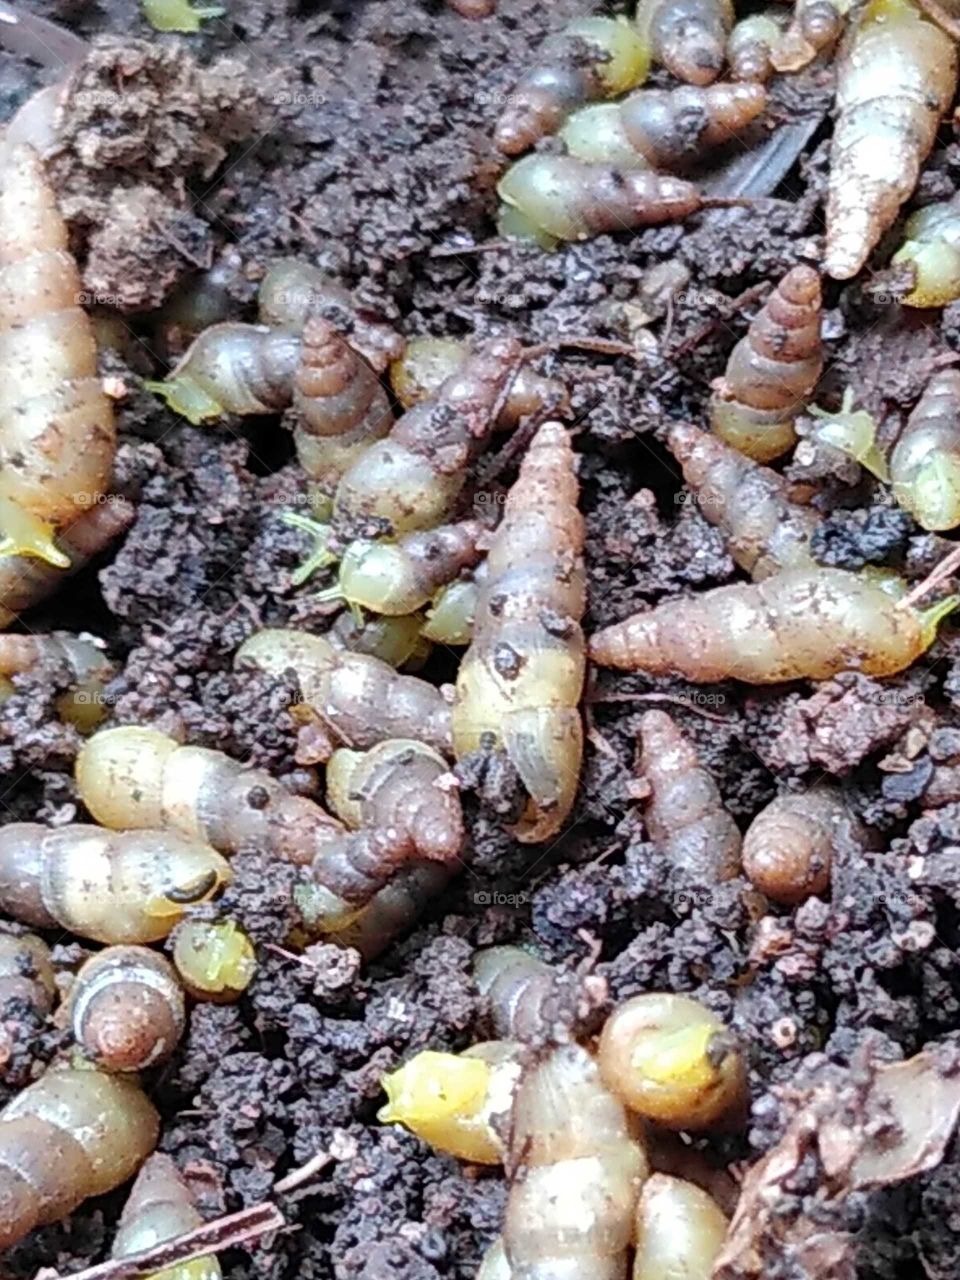 snails in the compost